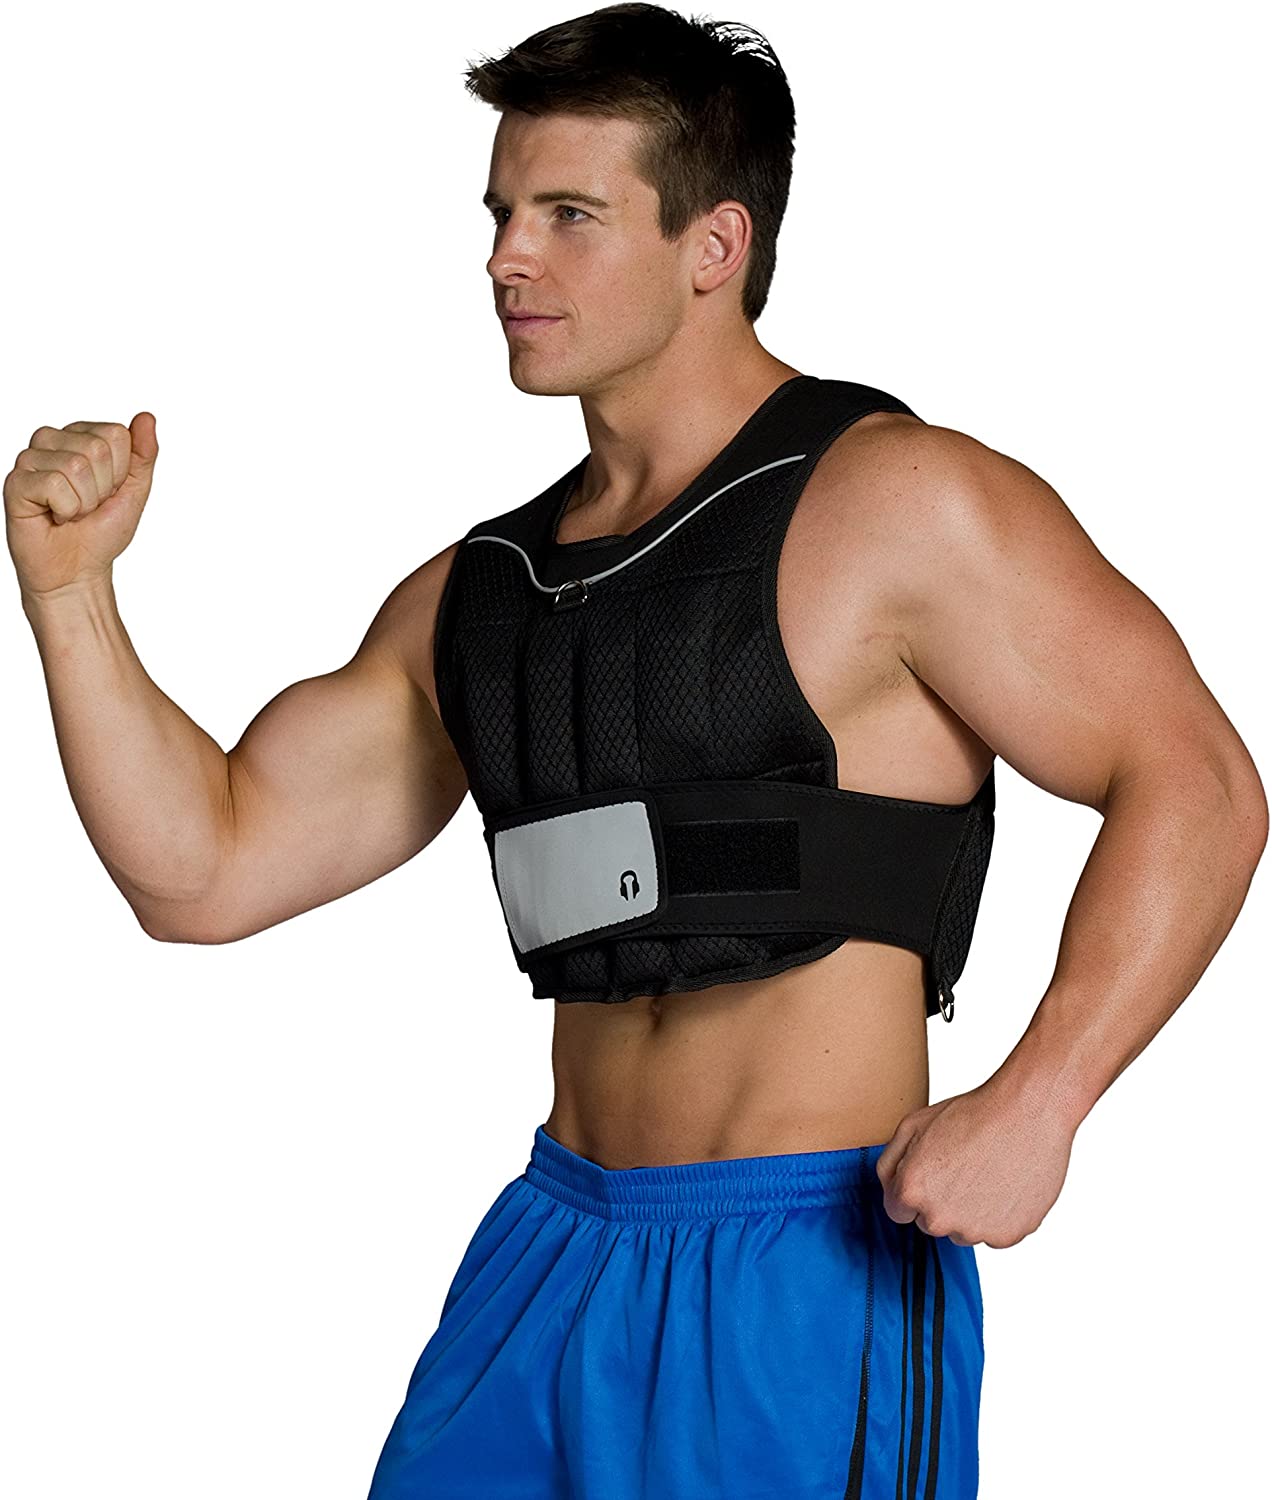 CAP Barbell 20 Lb. Adjustable Weighted Vest - image 4 of 6